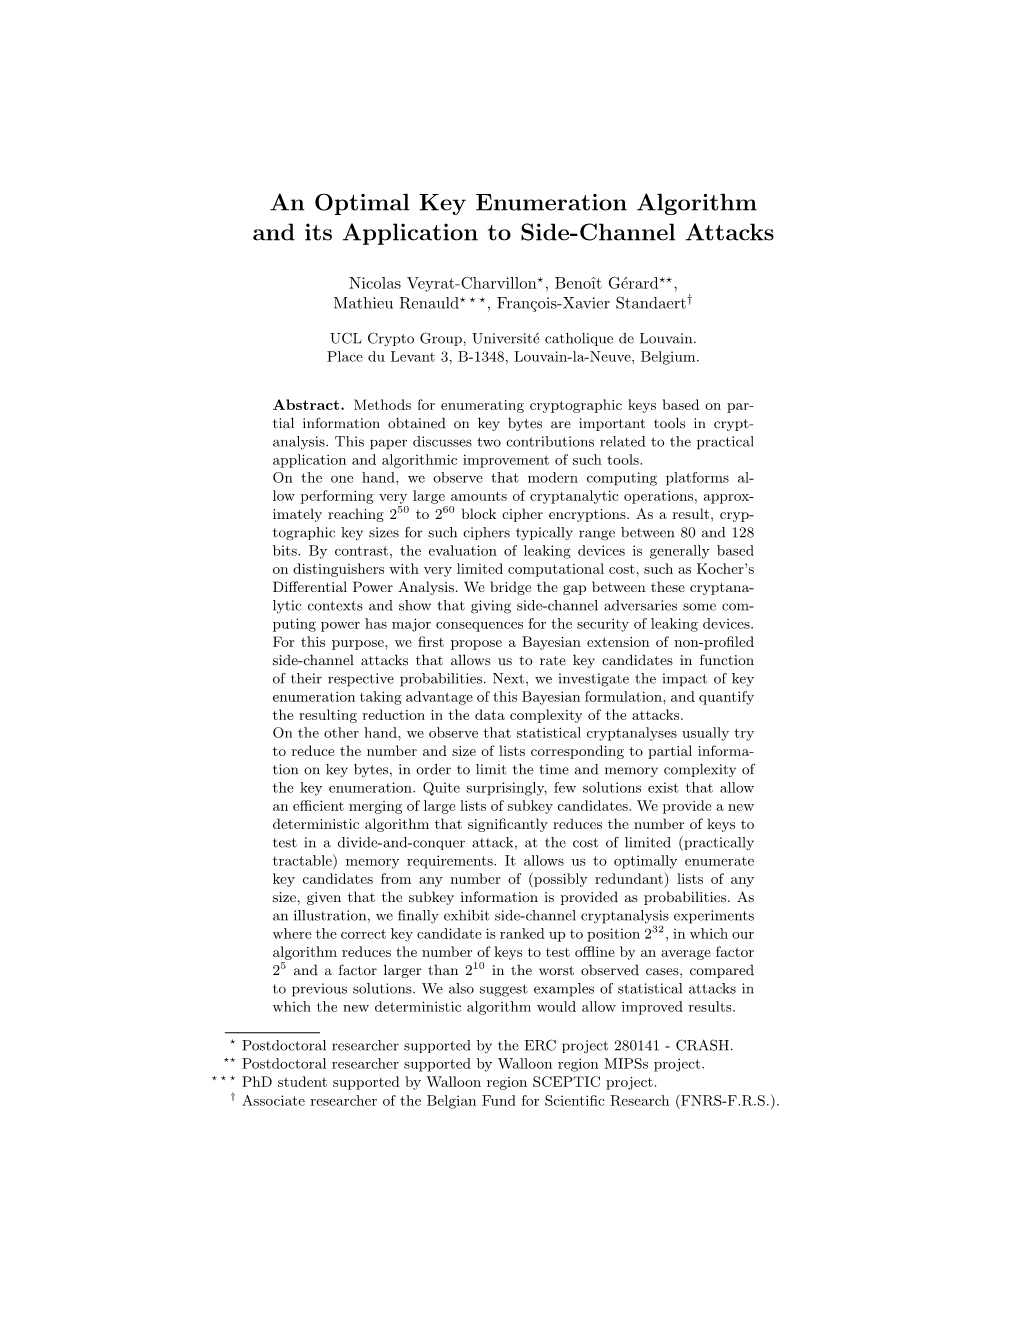 An Optimal Key Enumeration Algorithm and Its Application to Side-Channel Attacks